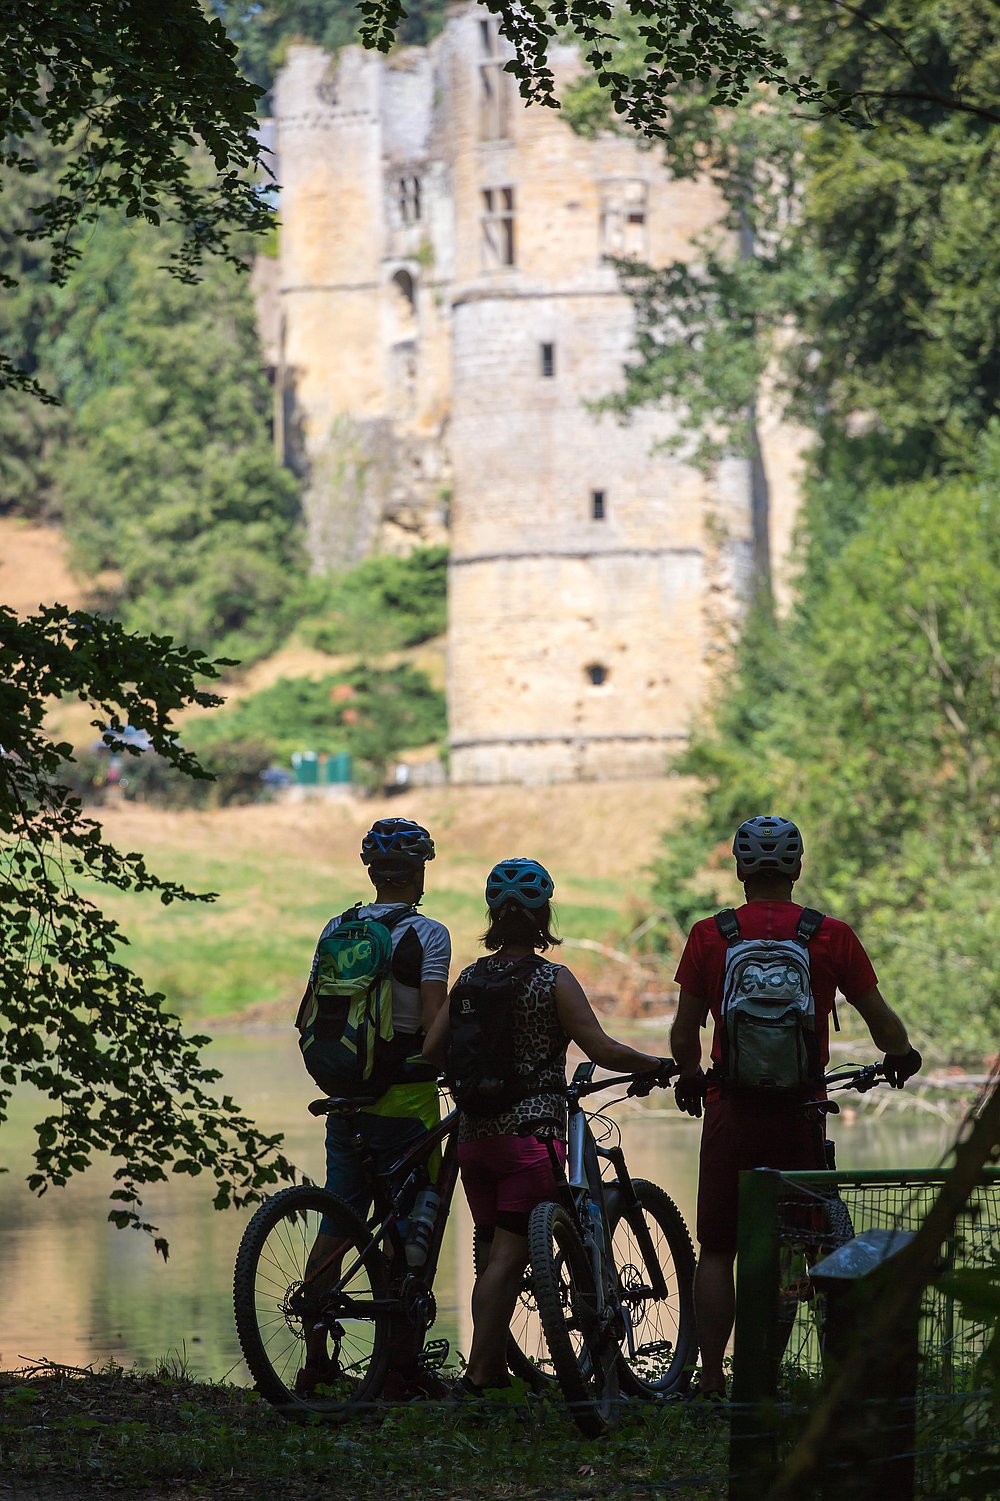 Biking tour at the castle of Beaufort